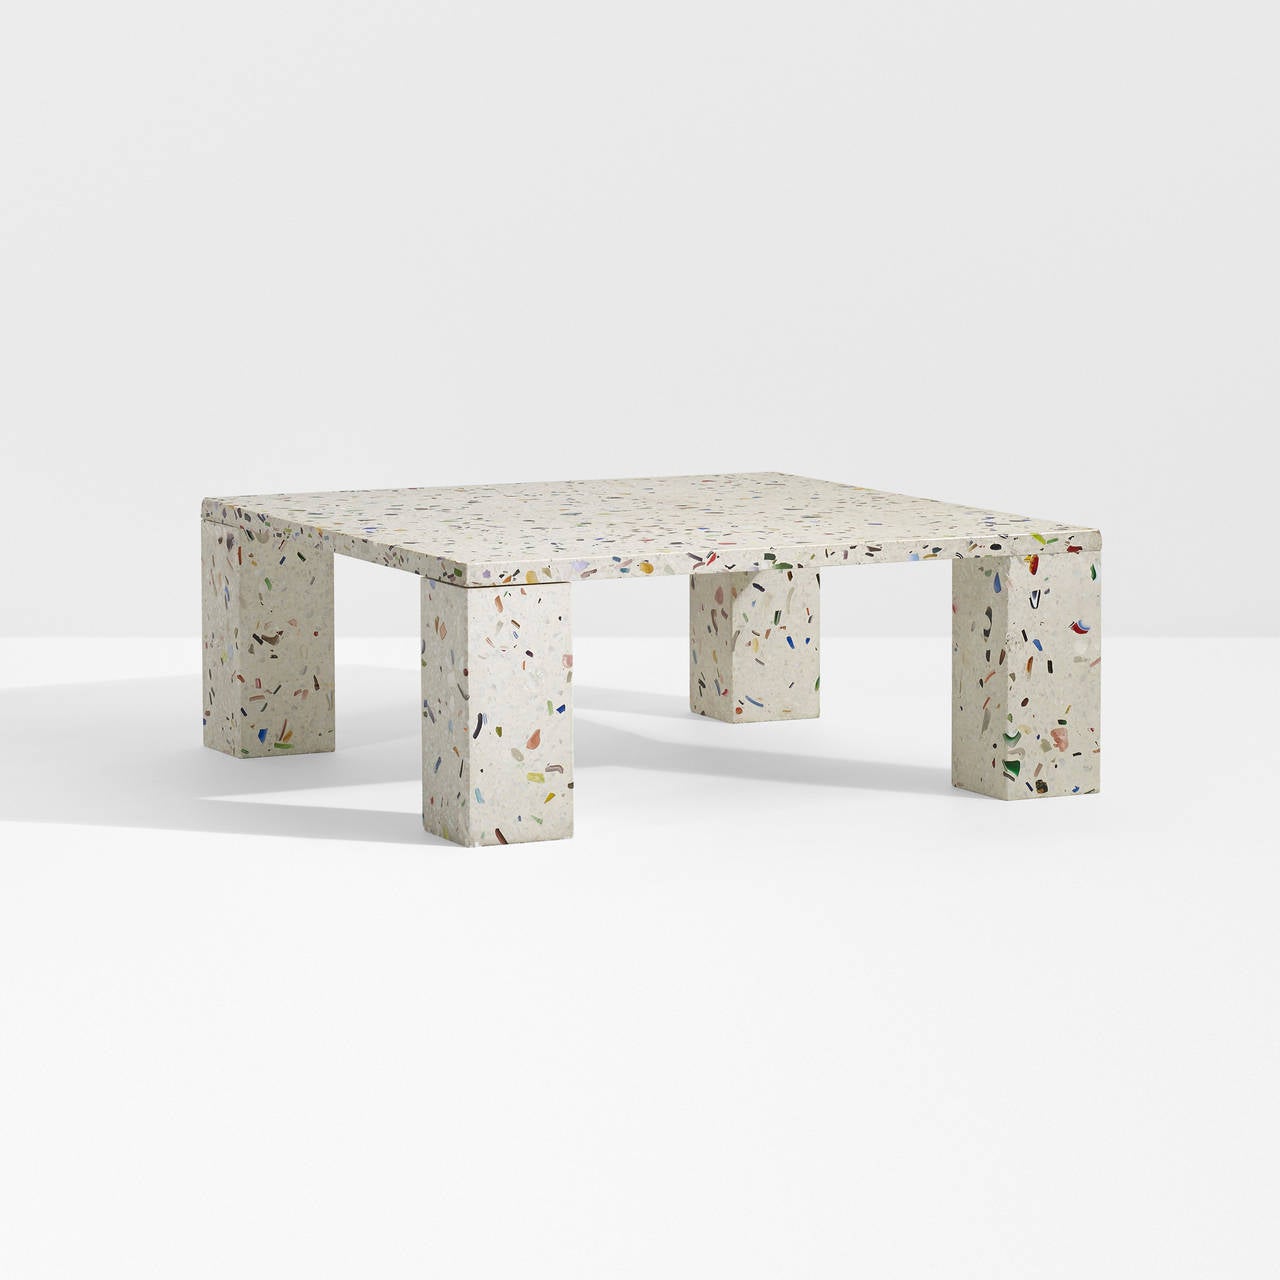 table for the Esprit House

Ishimaru Co., Ltd
Japan, 1983
Star Piece terrazzo
39.25 w x 39.25 d x 15 h inches

This work is unique.

provenance: Esprit House, Tokyo | Private Japanese collection 
literature: Shiro Kuramata 1934-1991, Hara